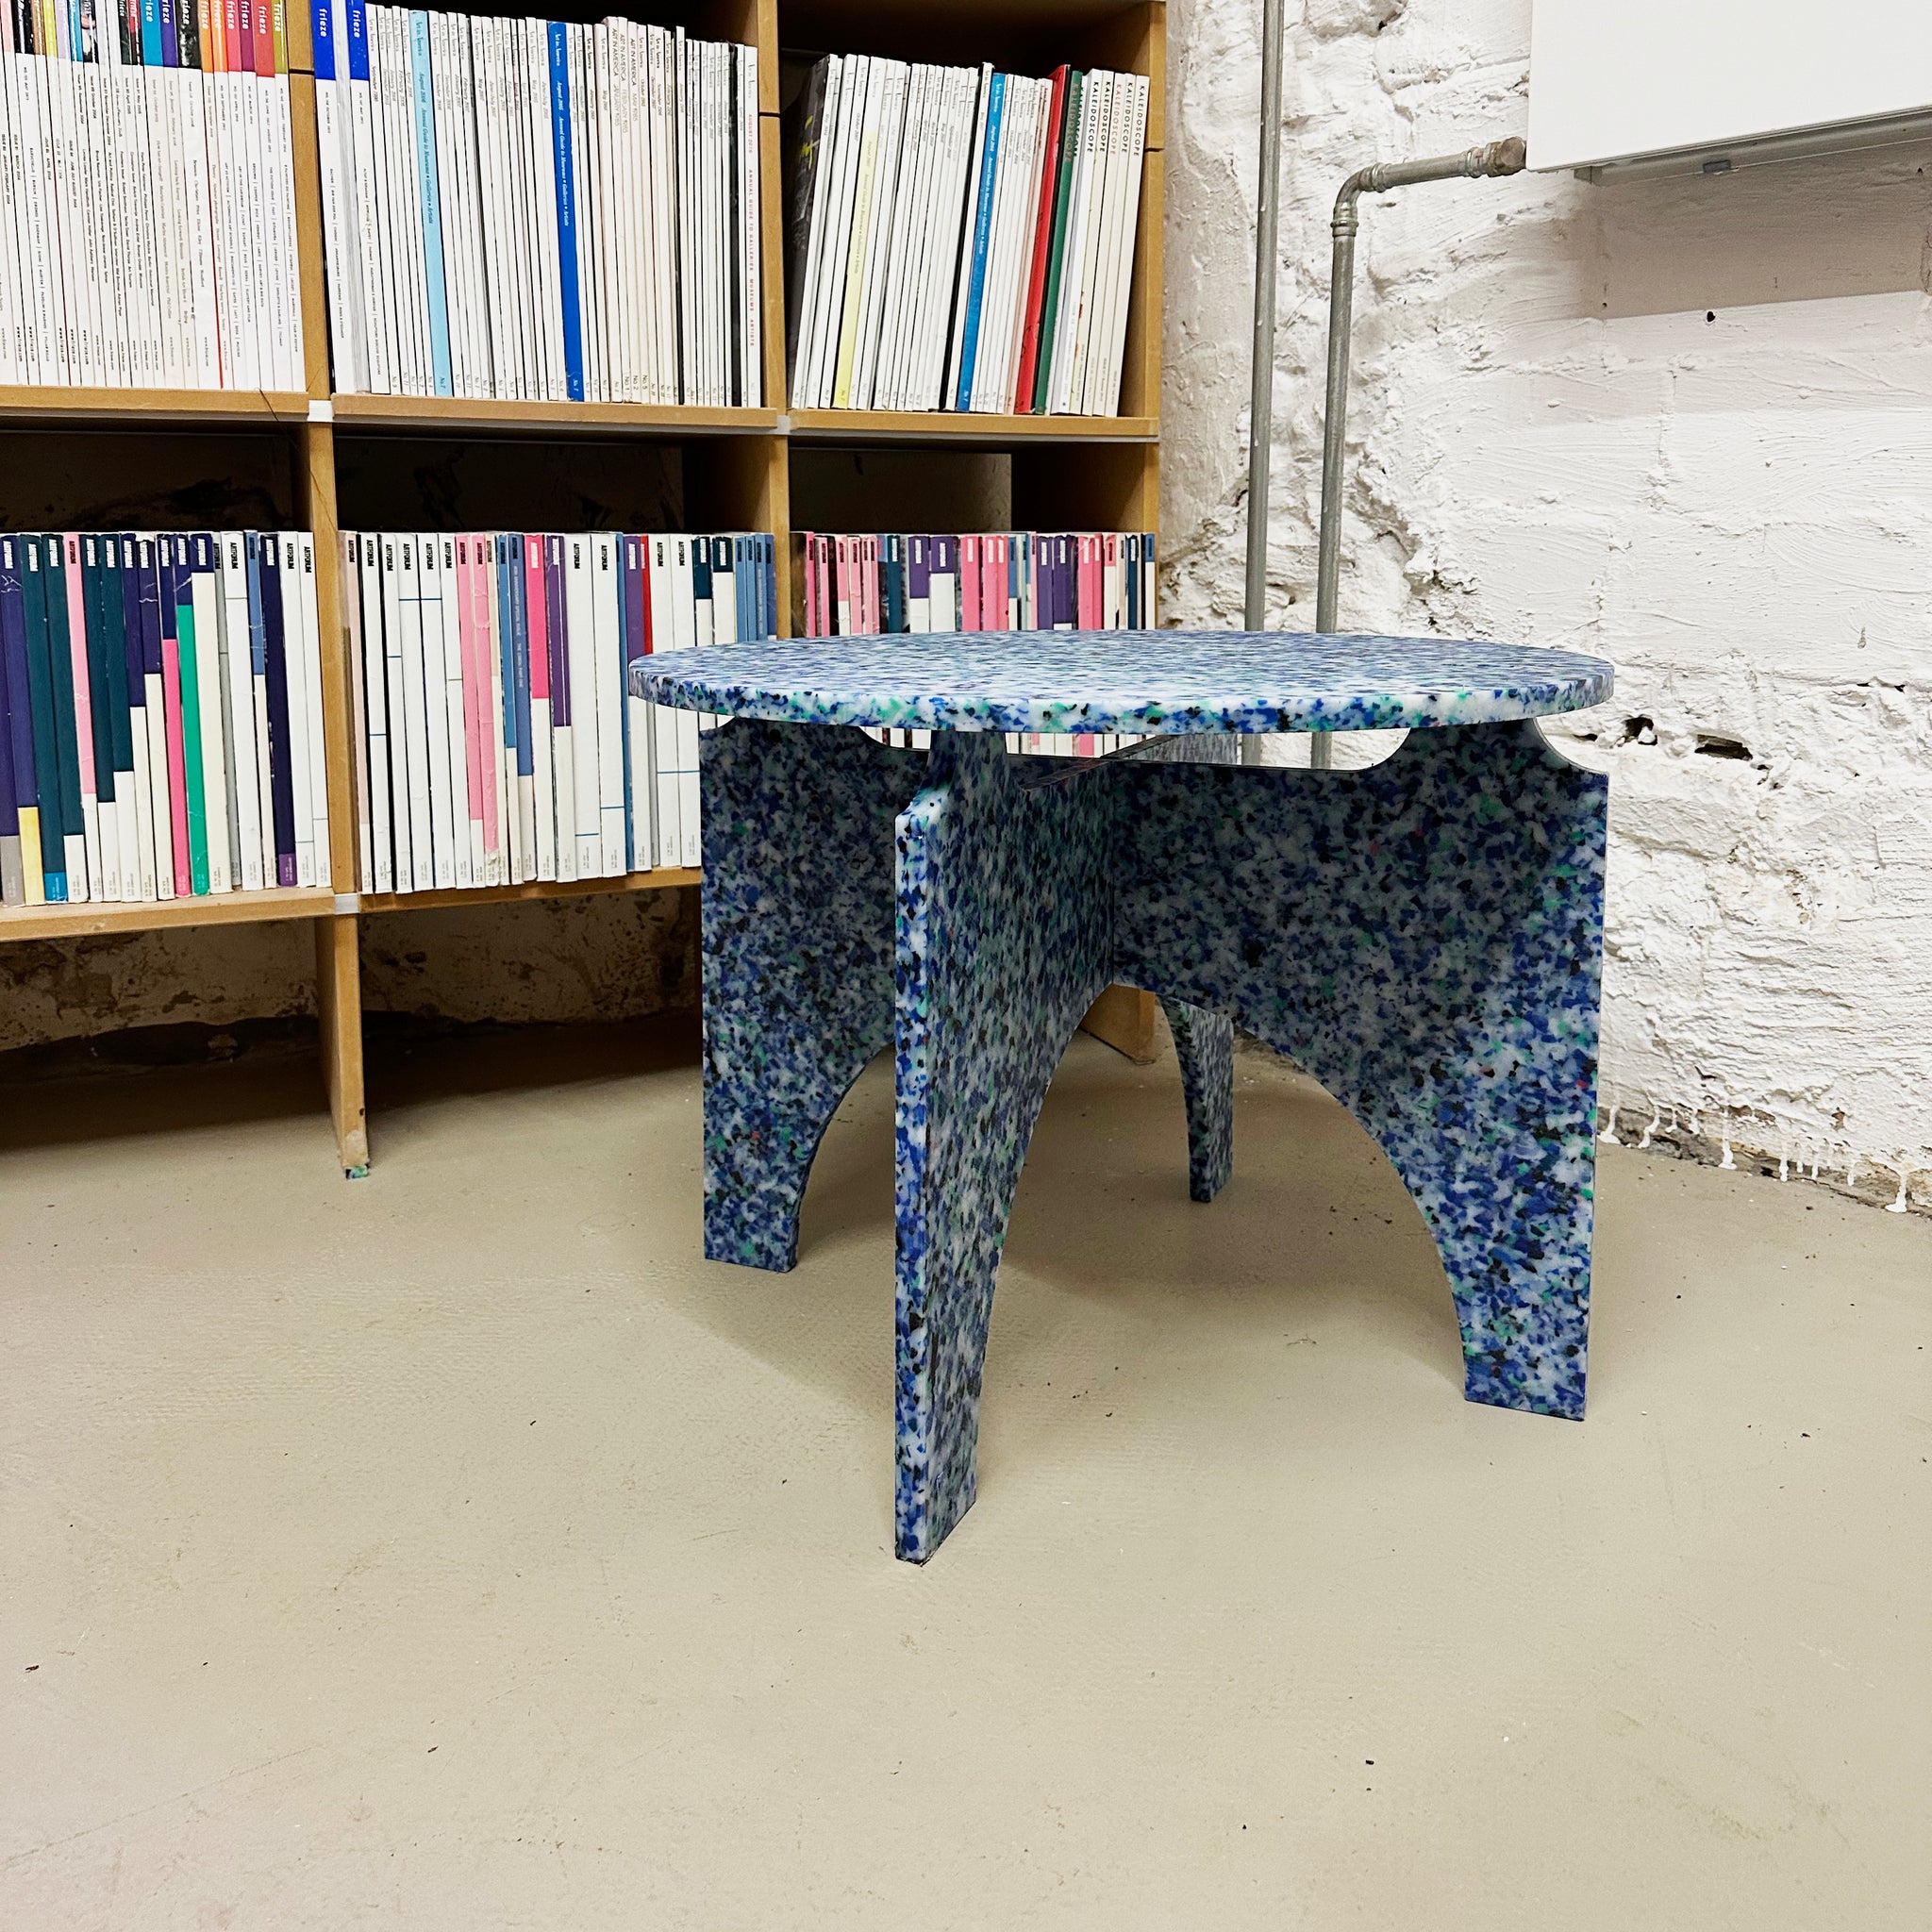 BLUE TABLE BY THE MINIMONO PROJECT - BRAND FOR ECO FRIENDLY - PLAYFUL - MULTI FUNCTIONAL - SUSTAINABLE - HIGH QUALITY - DESIGN FURNITURE FROM RECYCLED PLASTIC FOR BOTH ADULT AND CHILDREN MADE IN BERLIN GERMANY